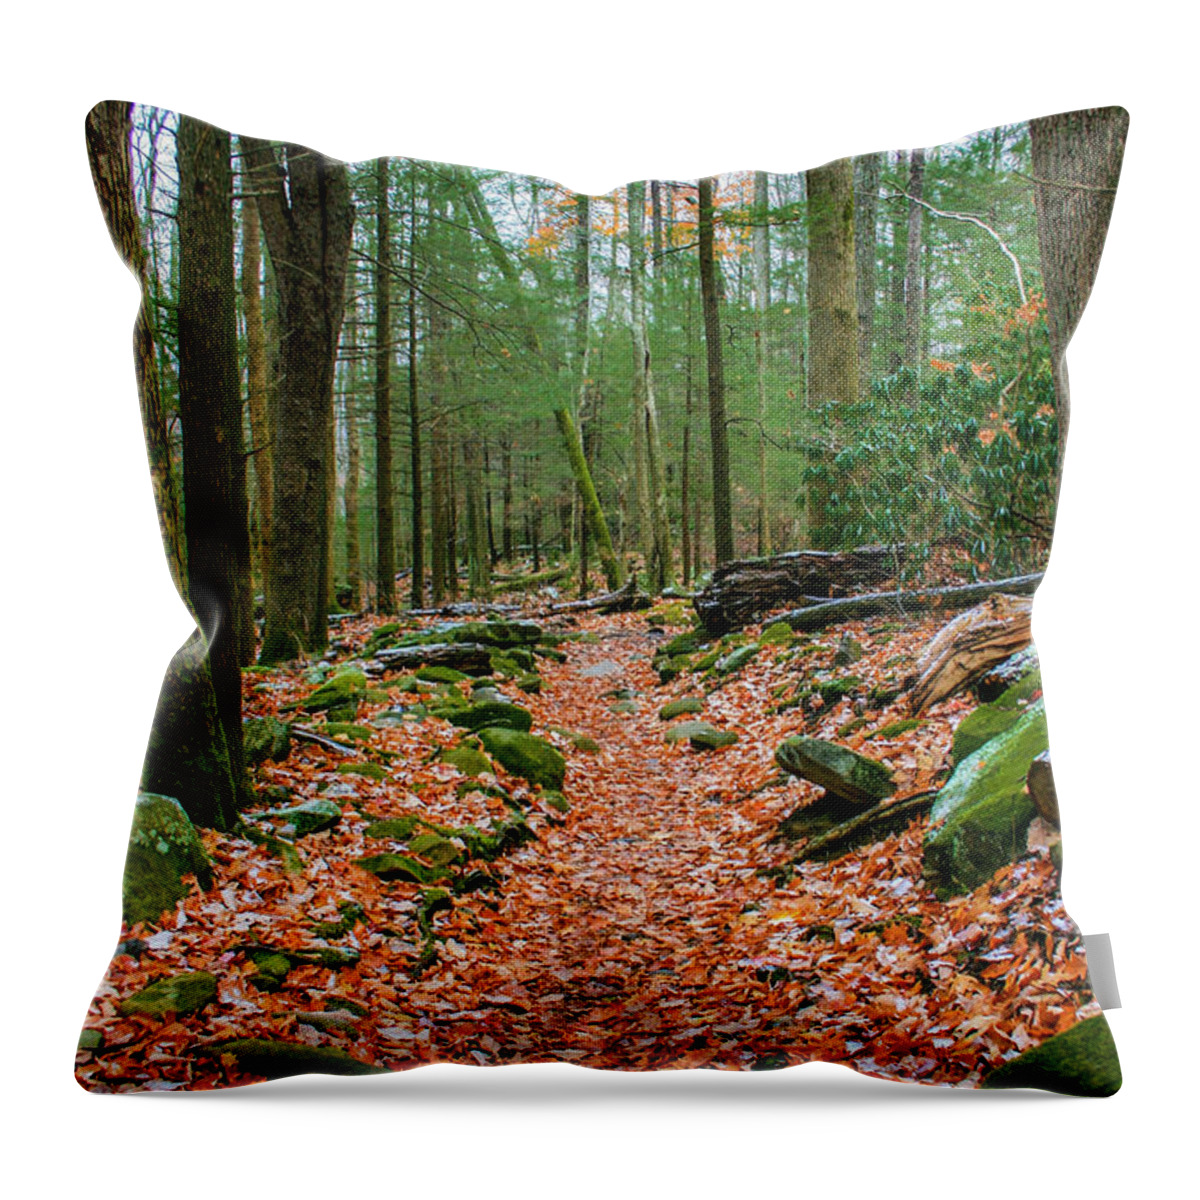 Photo For Sale Throw Pillow featuring the photograph Hiking Trail in Autumn by Robert Wilder Jr